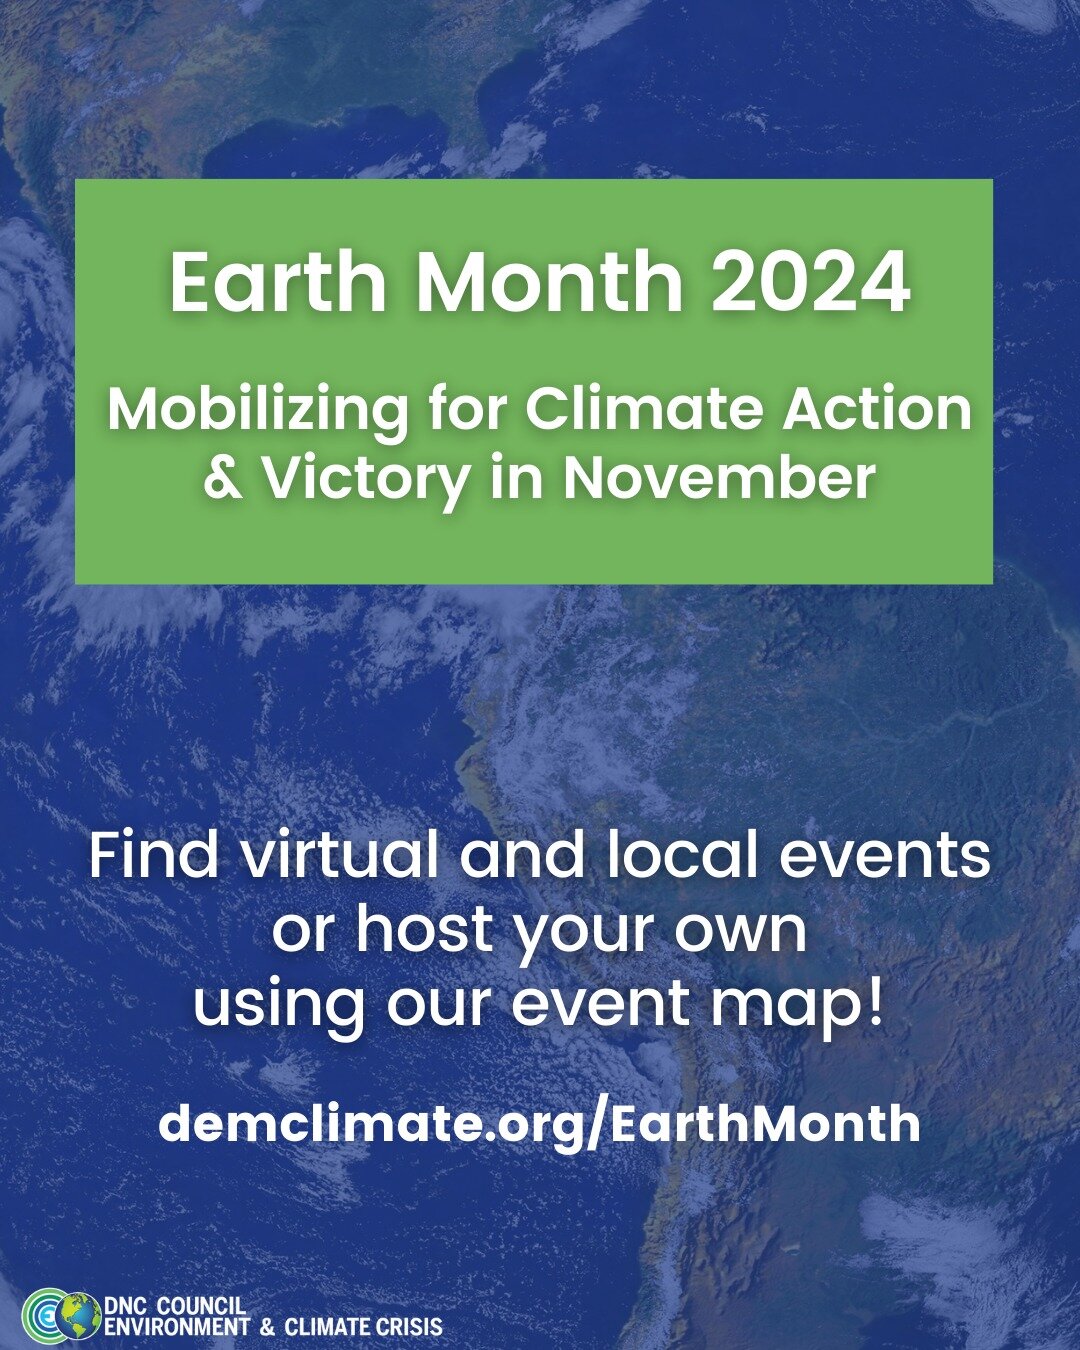 📣🌍 Launching today: Our Third Earth Month Mobilization!

Organize for climate action in 2024 with Democratic and environmental organizations worldwide &mdash; from nature walks to celebrations to roundtable discussions and more.

Search for an even